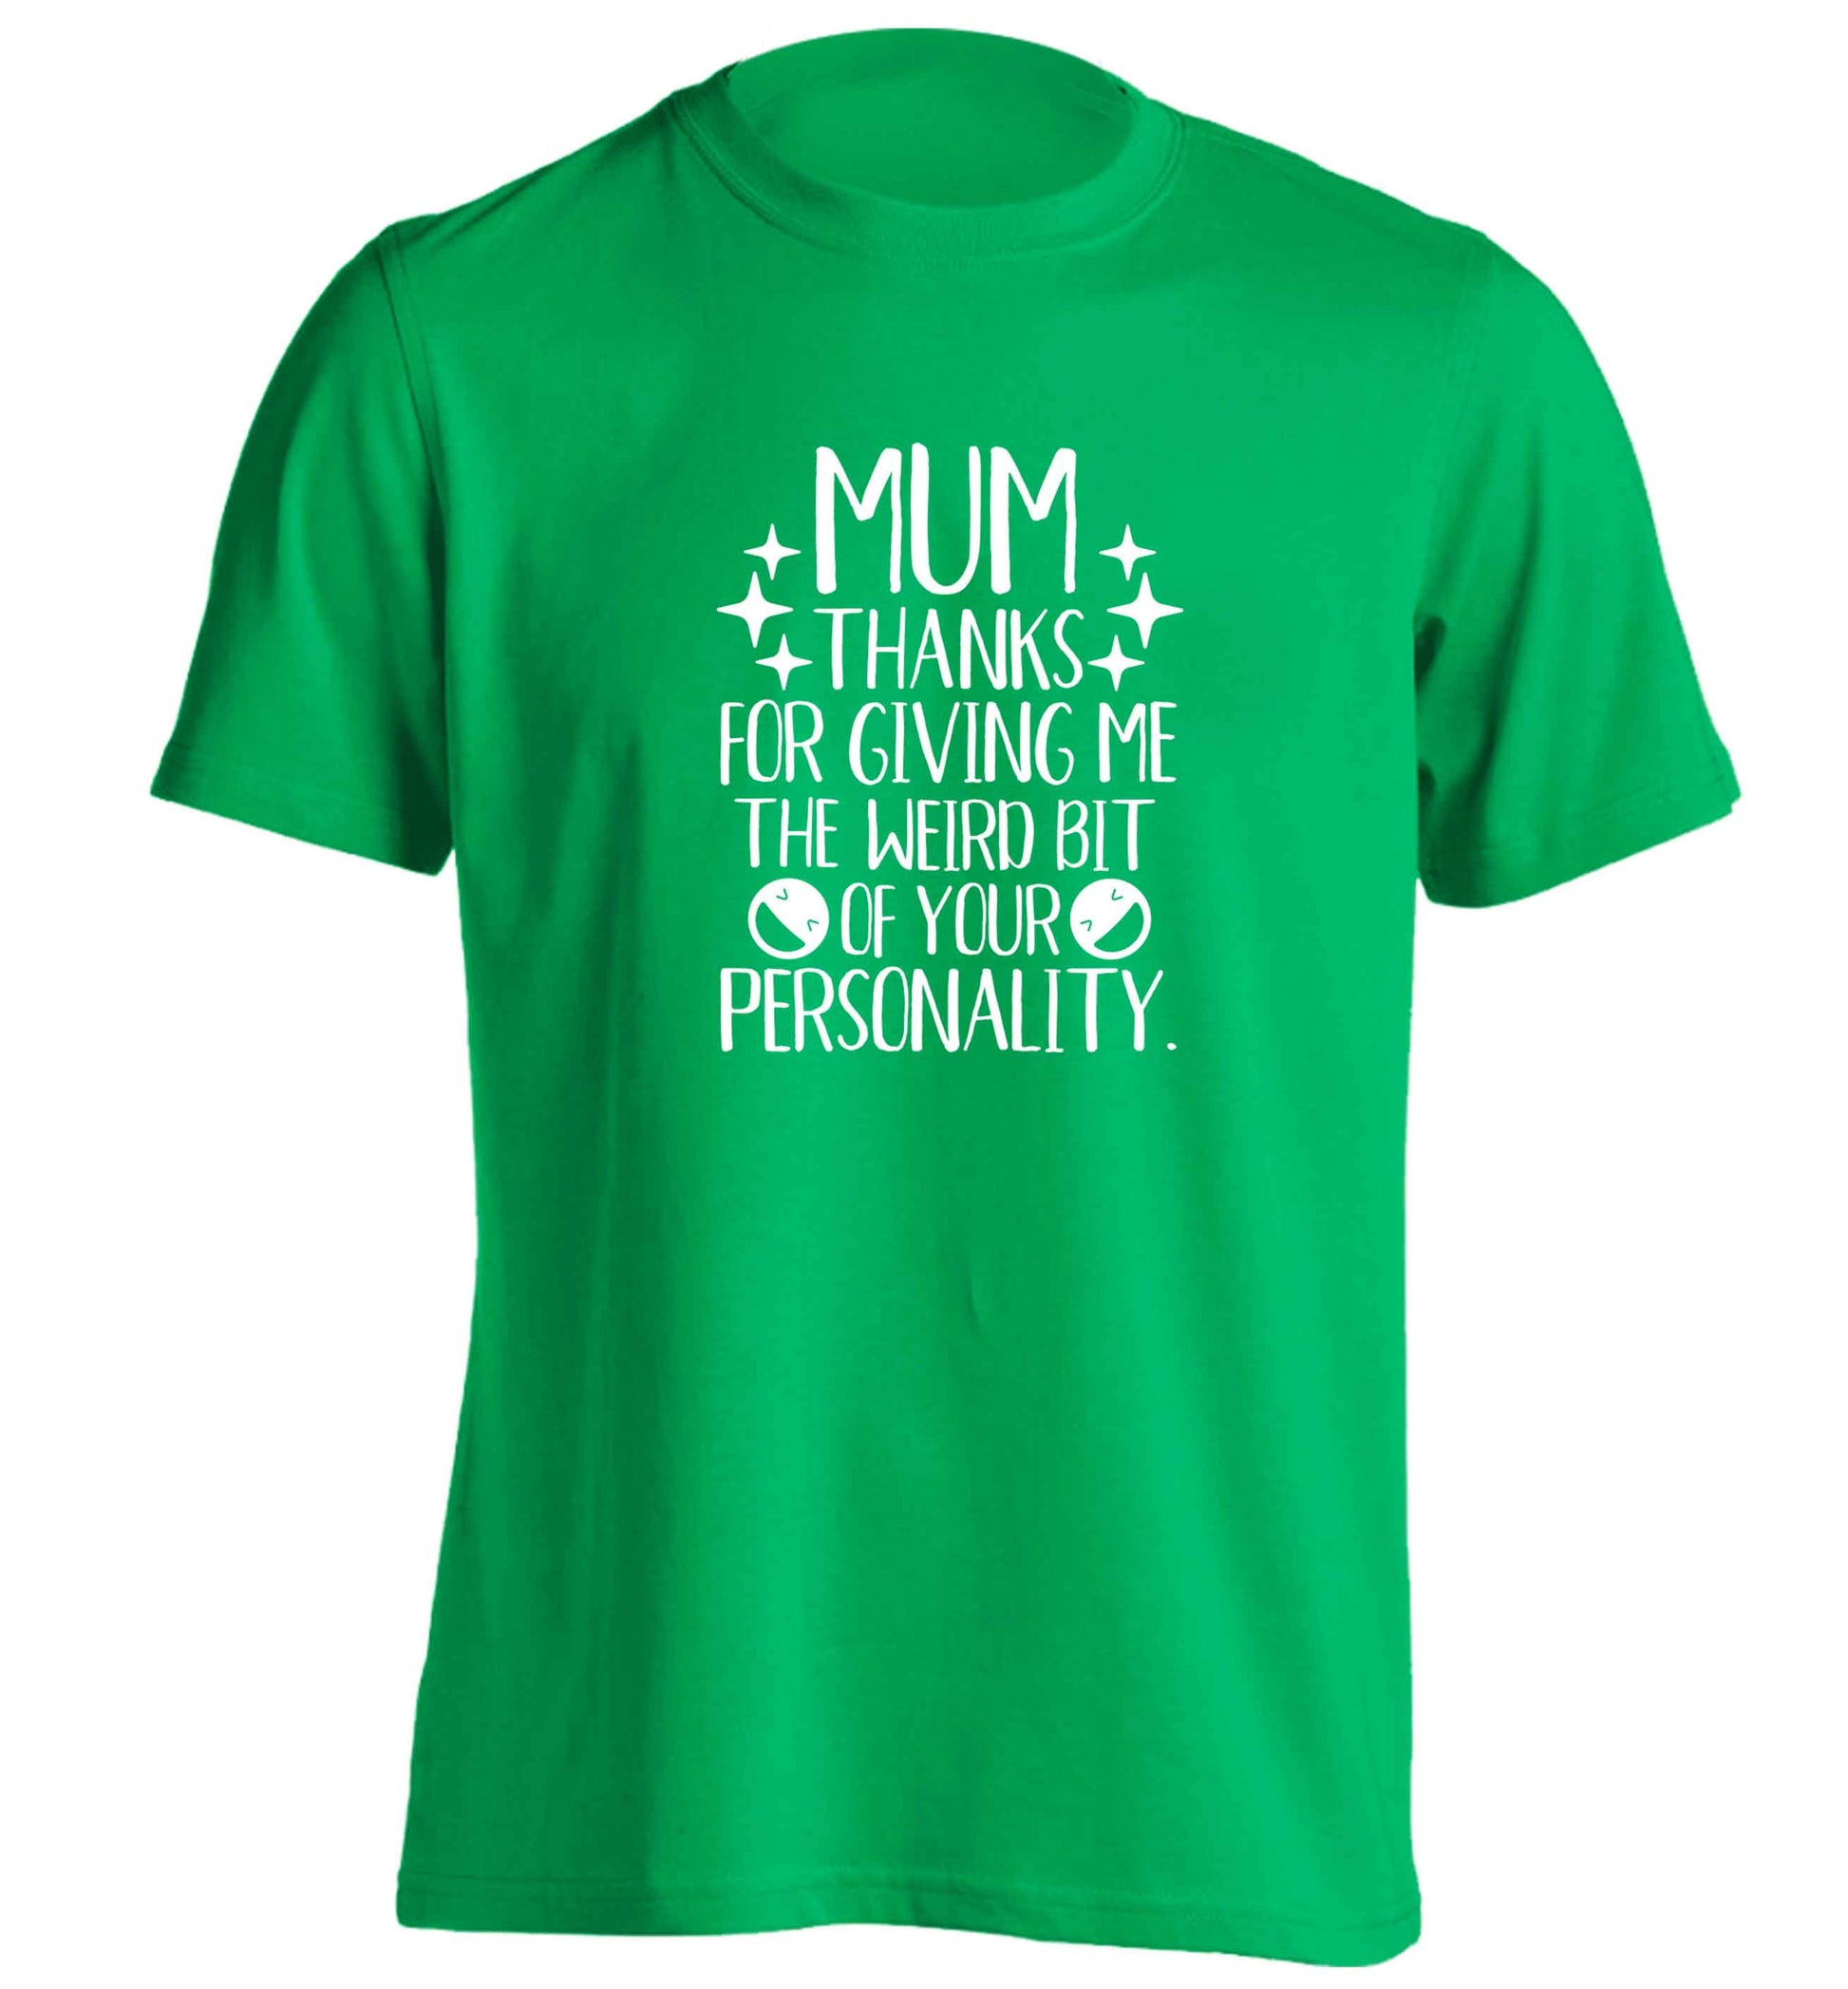 Mum thanks for giving me the weird bit of your personality adults unisex green Tshirt 2XL